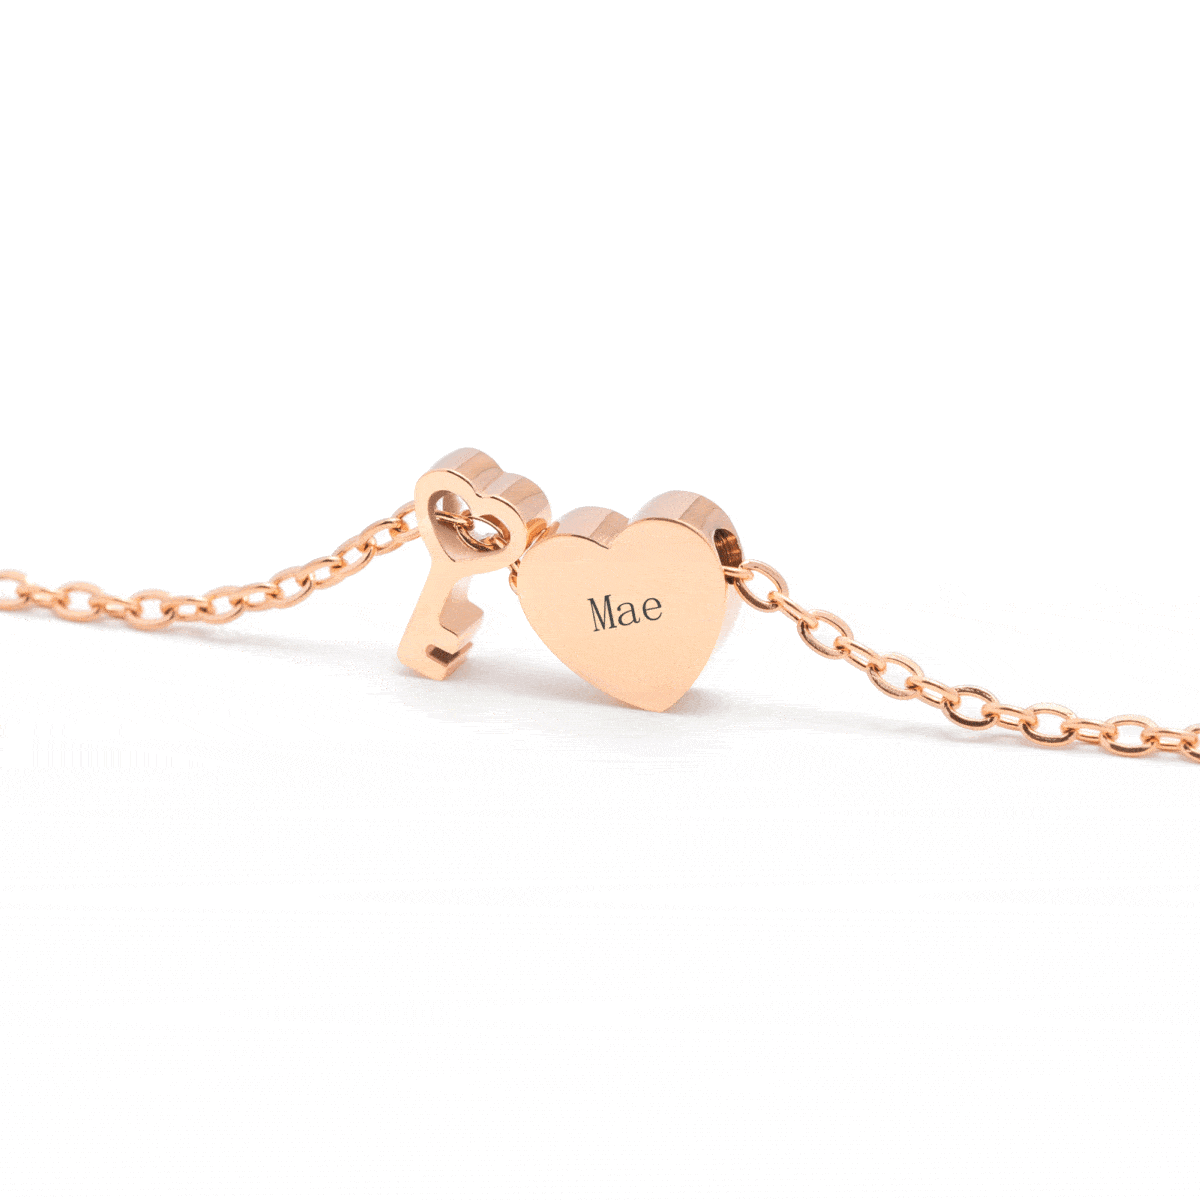 https://m.clubbella.co/product/key-to-thee-heart-rose-gold-charm-bracelet/ Key-to-thee-rose-gold-engrave